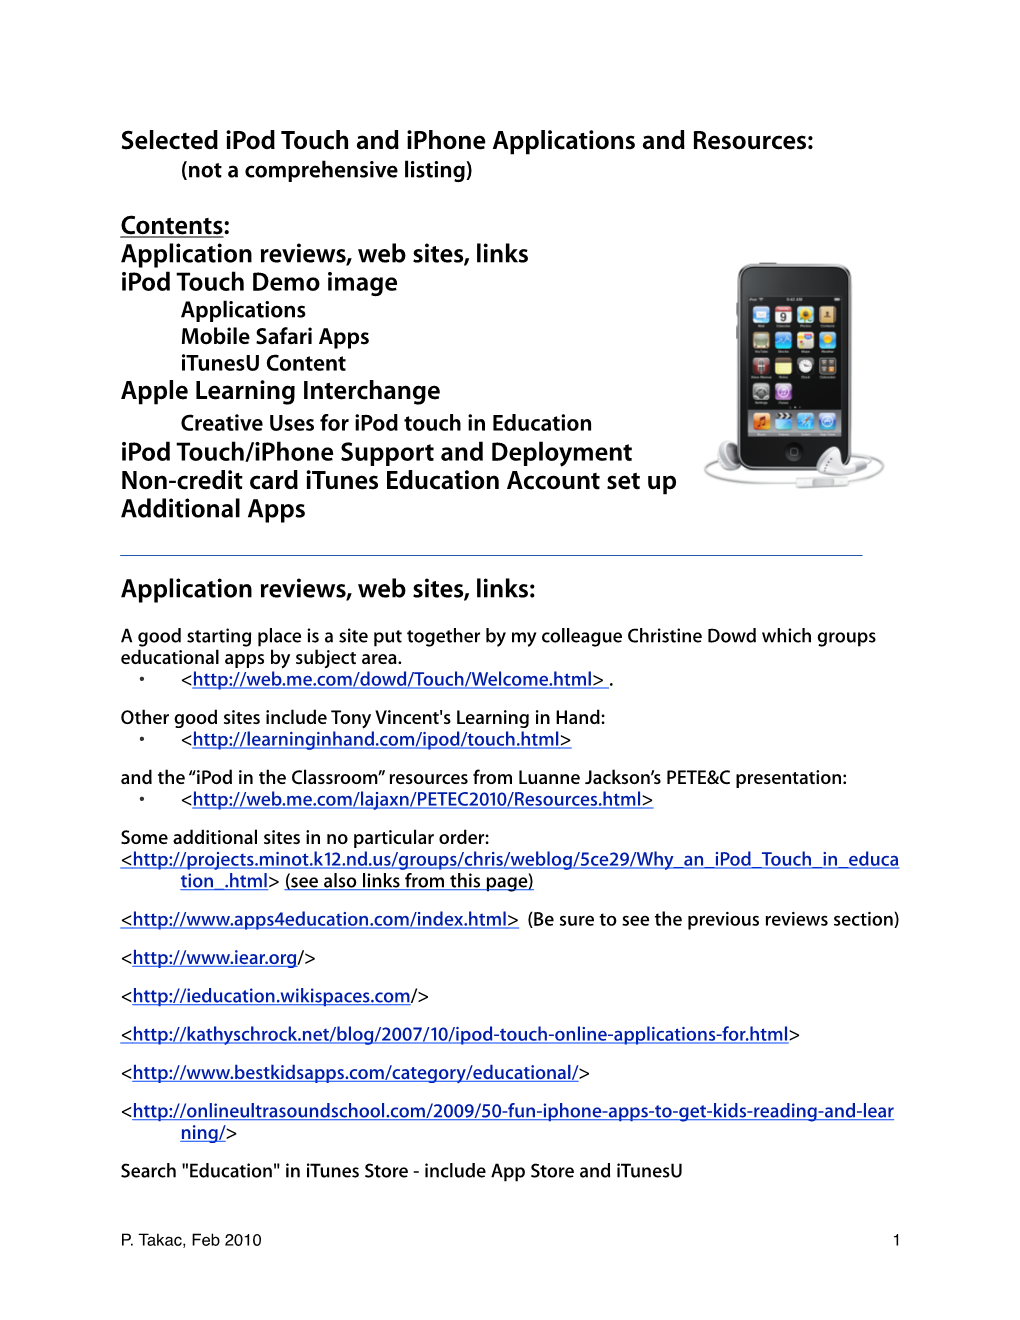 Ipod Touch:Iphone App Resources Final Feb 2010 V3